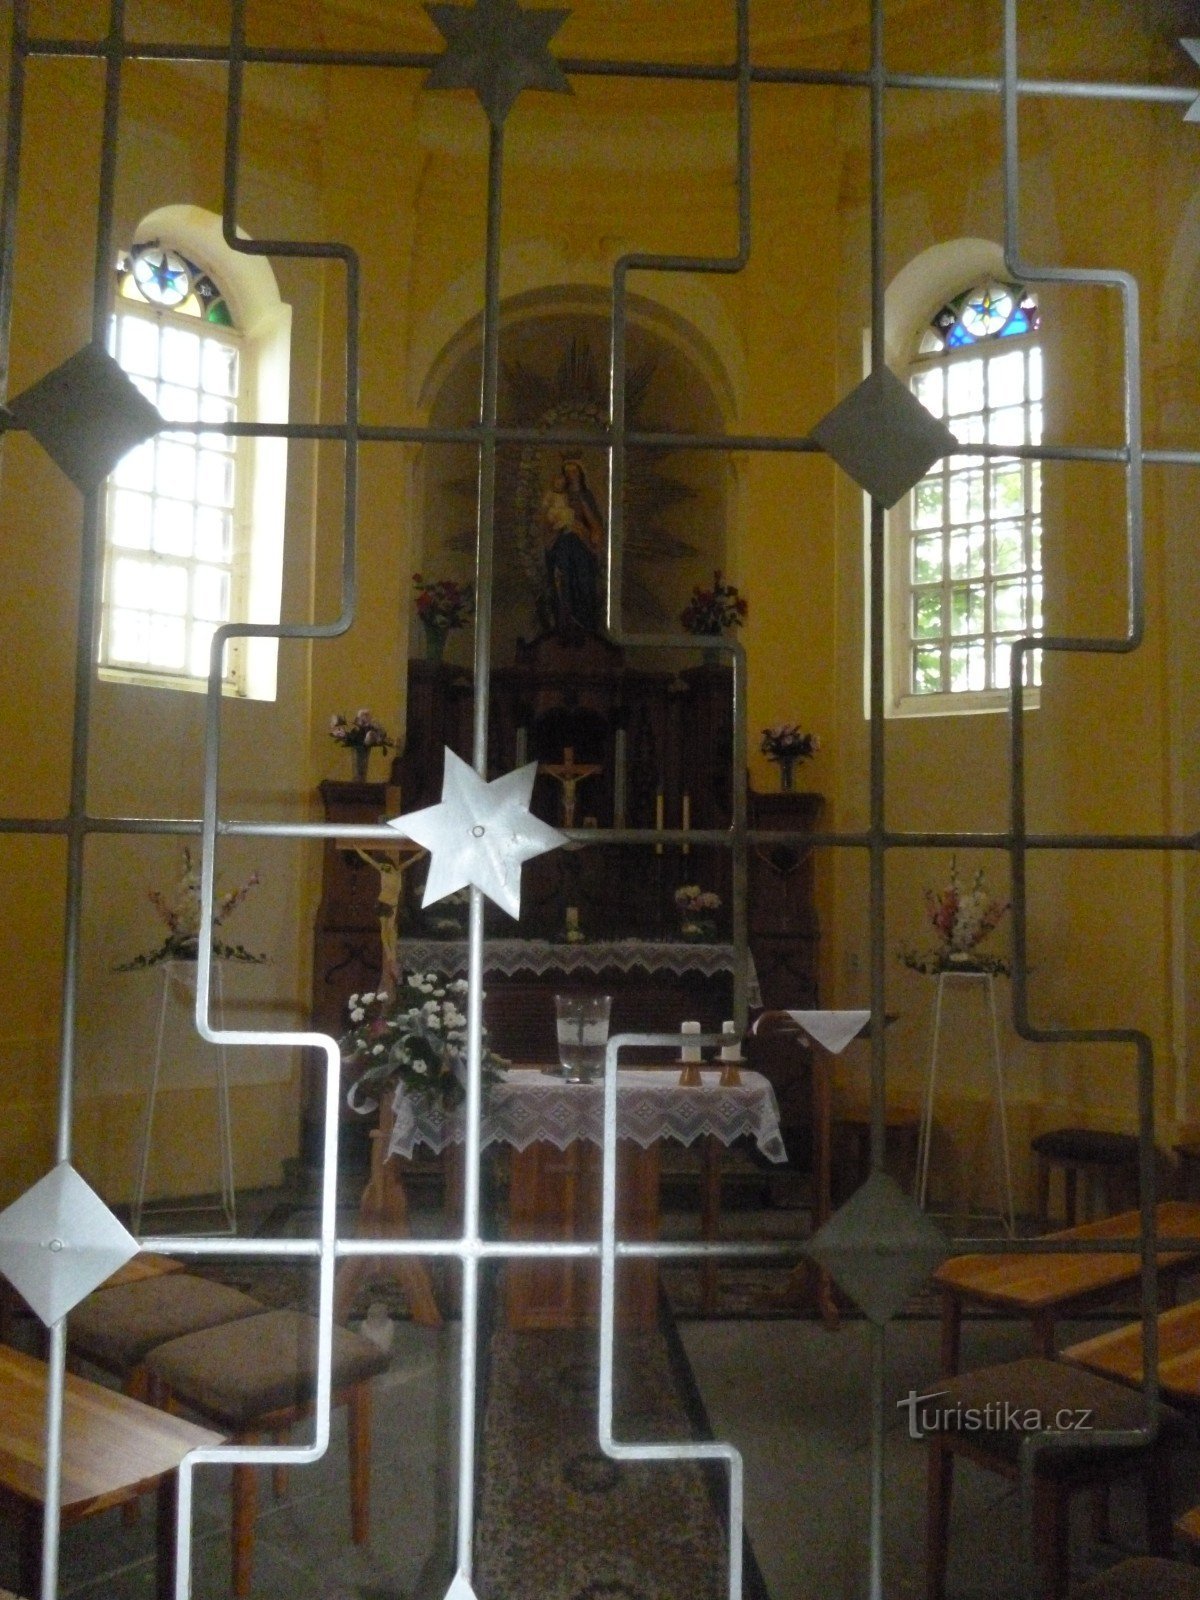 chapel of Our Lady of the Snows in Hvězda